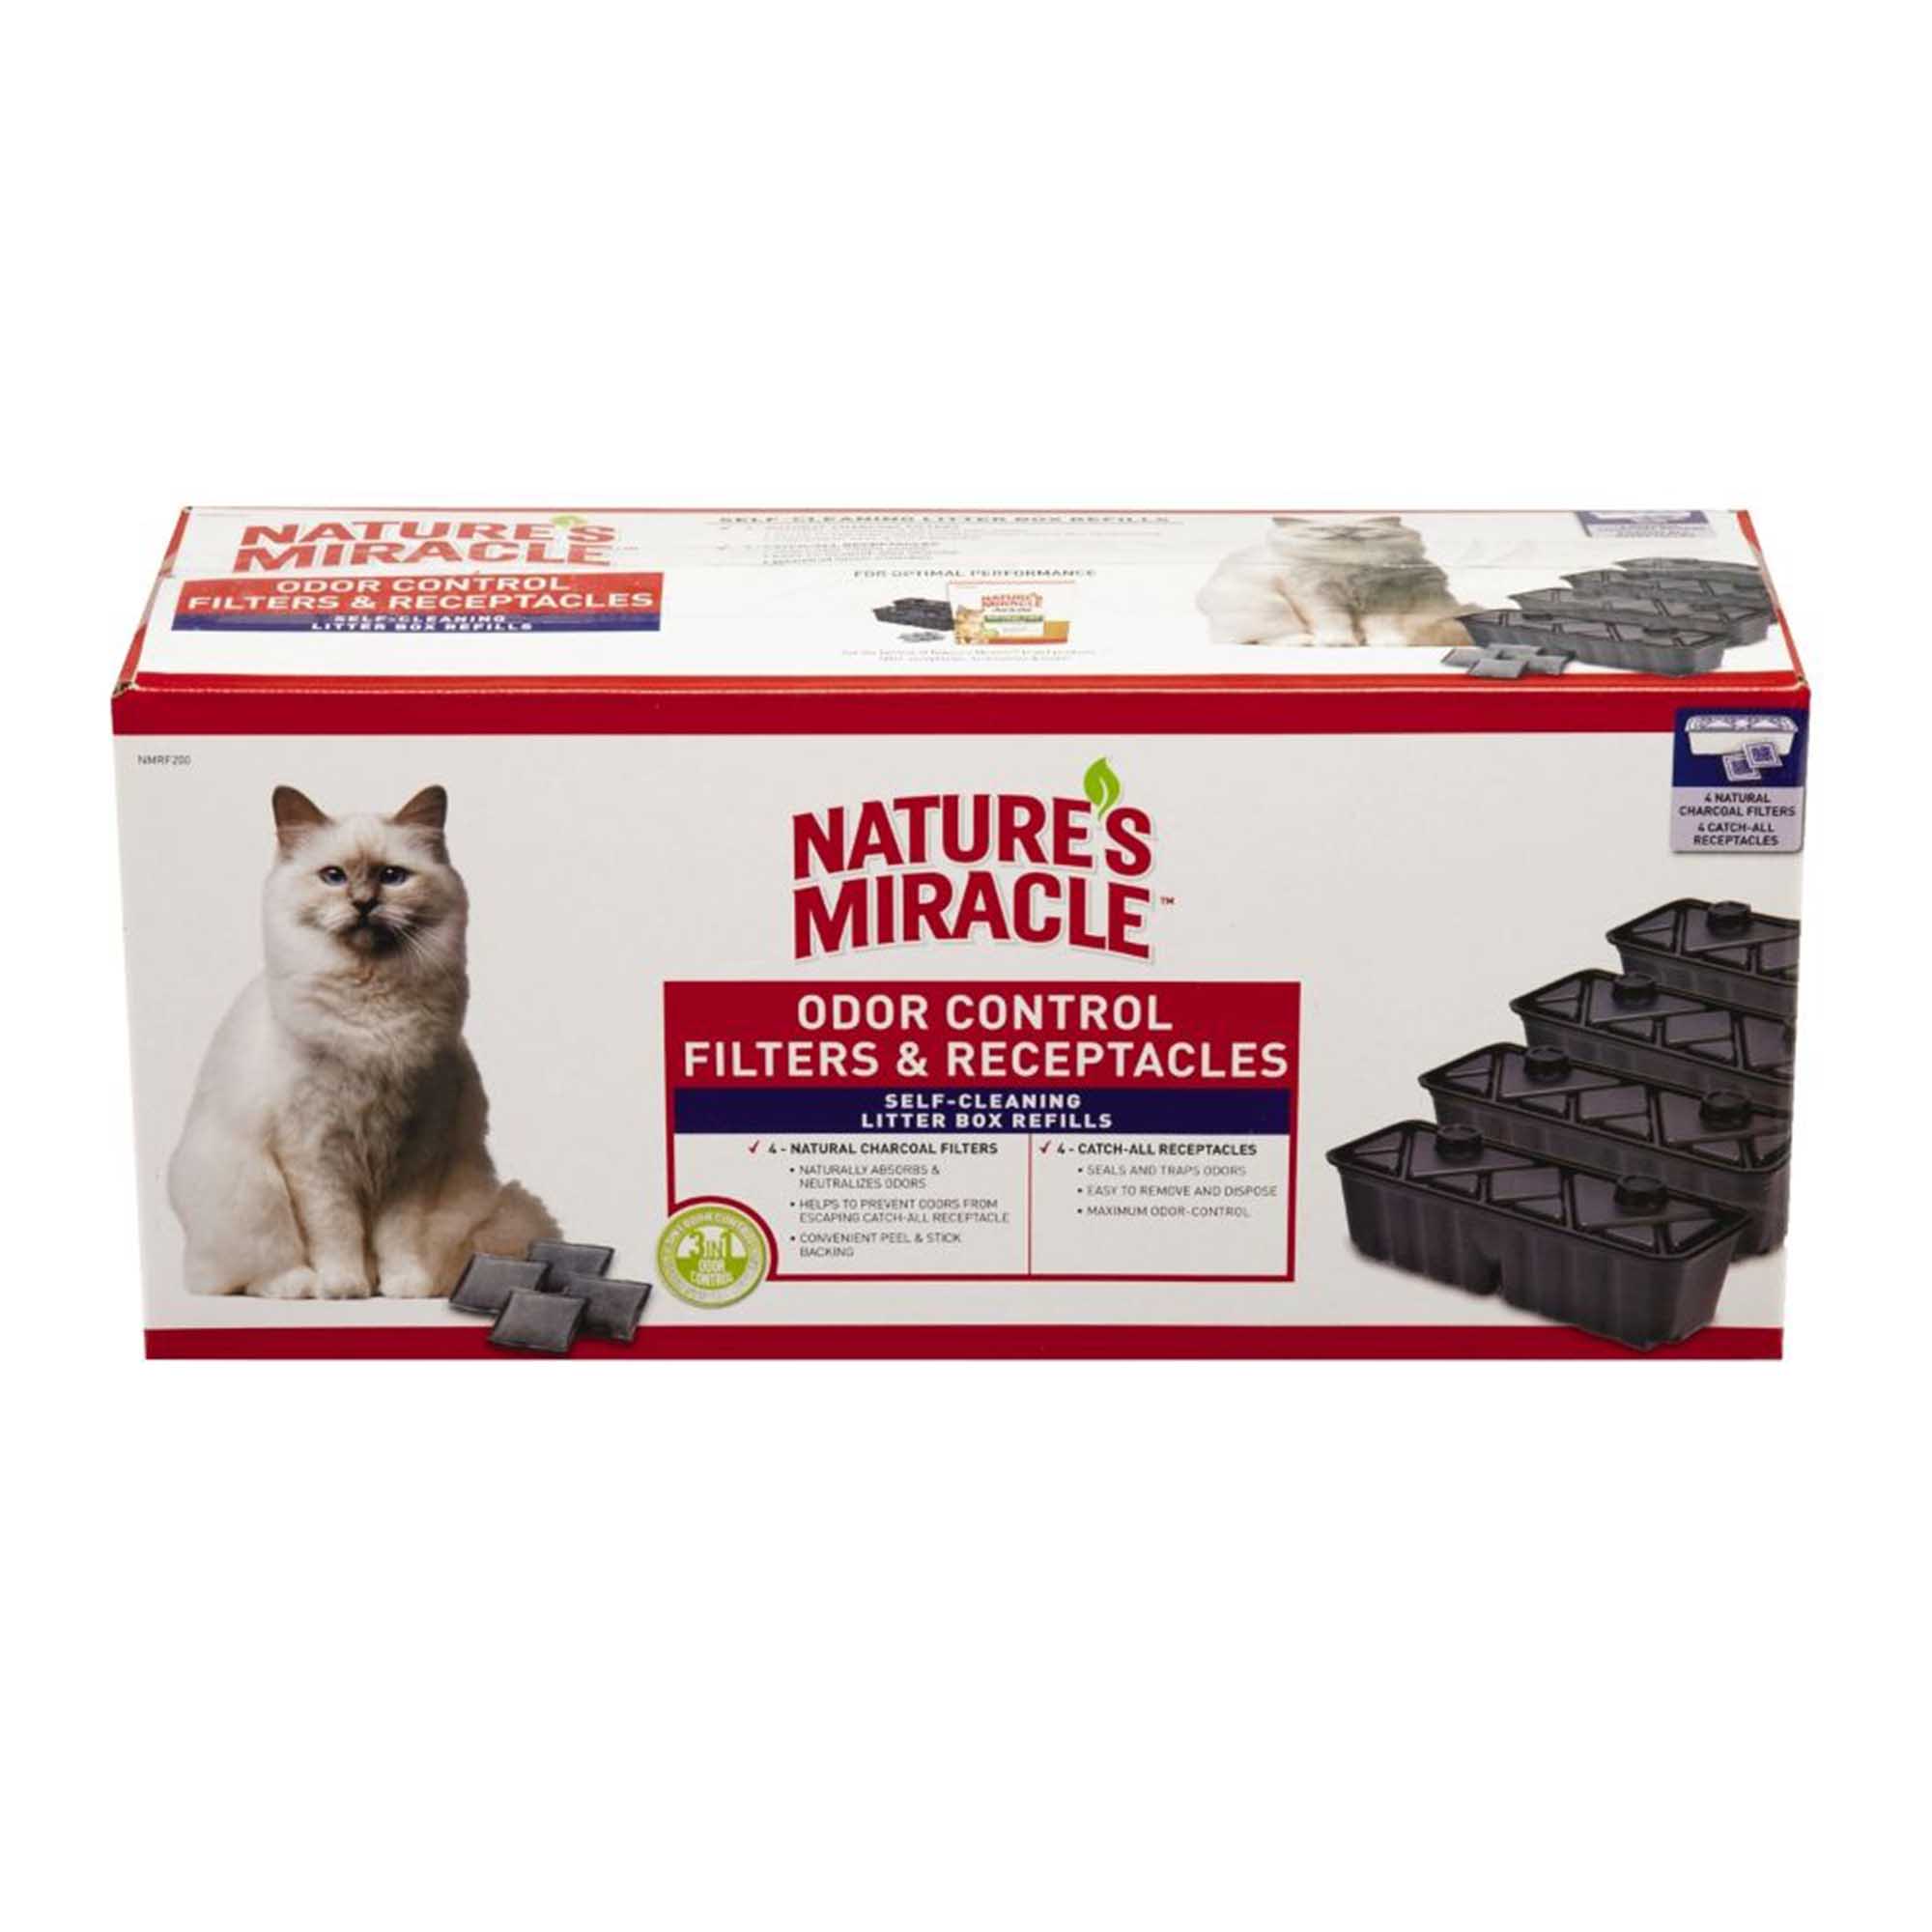 Natures Miracle Natures Miracle Single-Cat Self-Cleaning Litter Box 